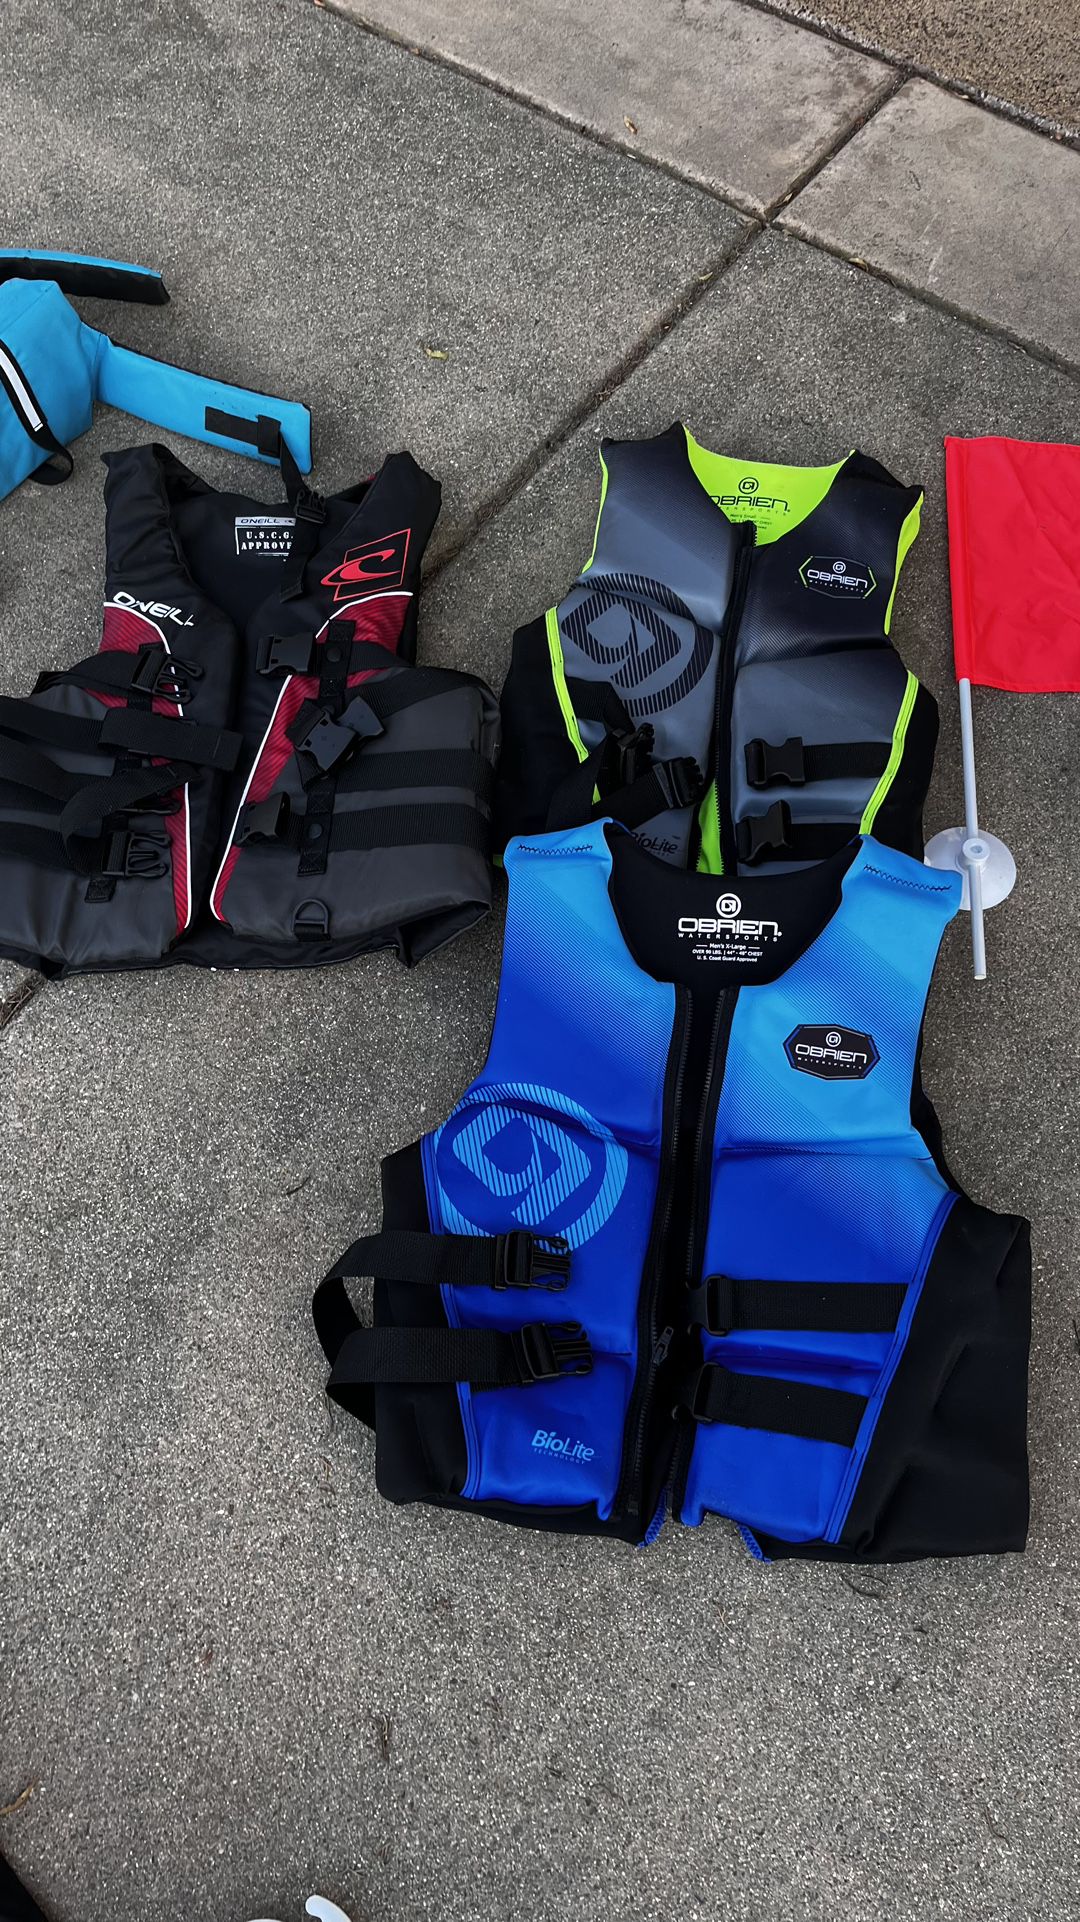 3 Life Jackets L, XL, And Small